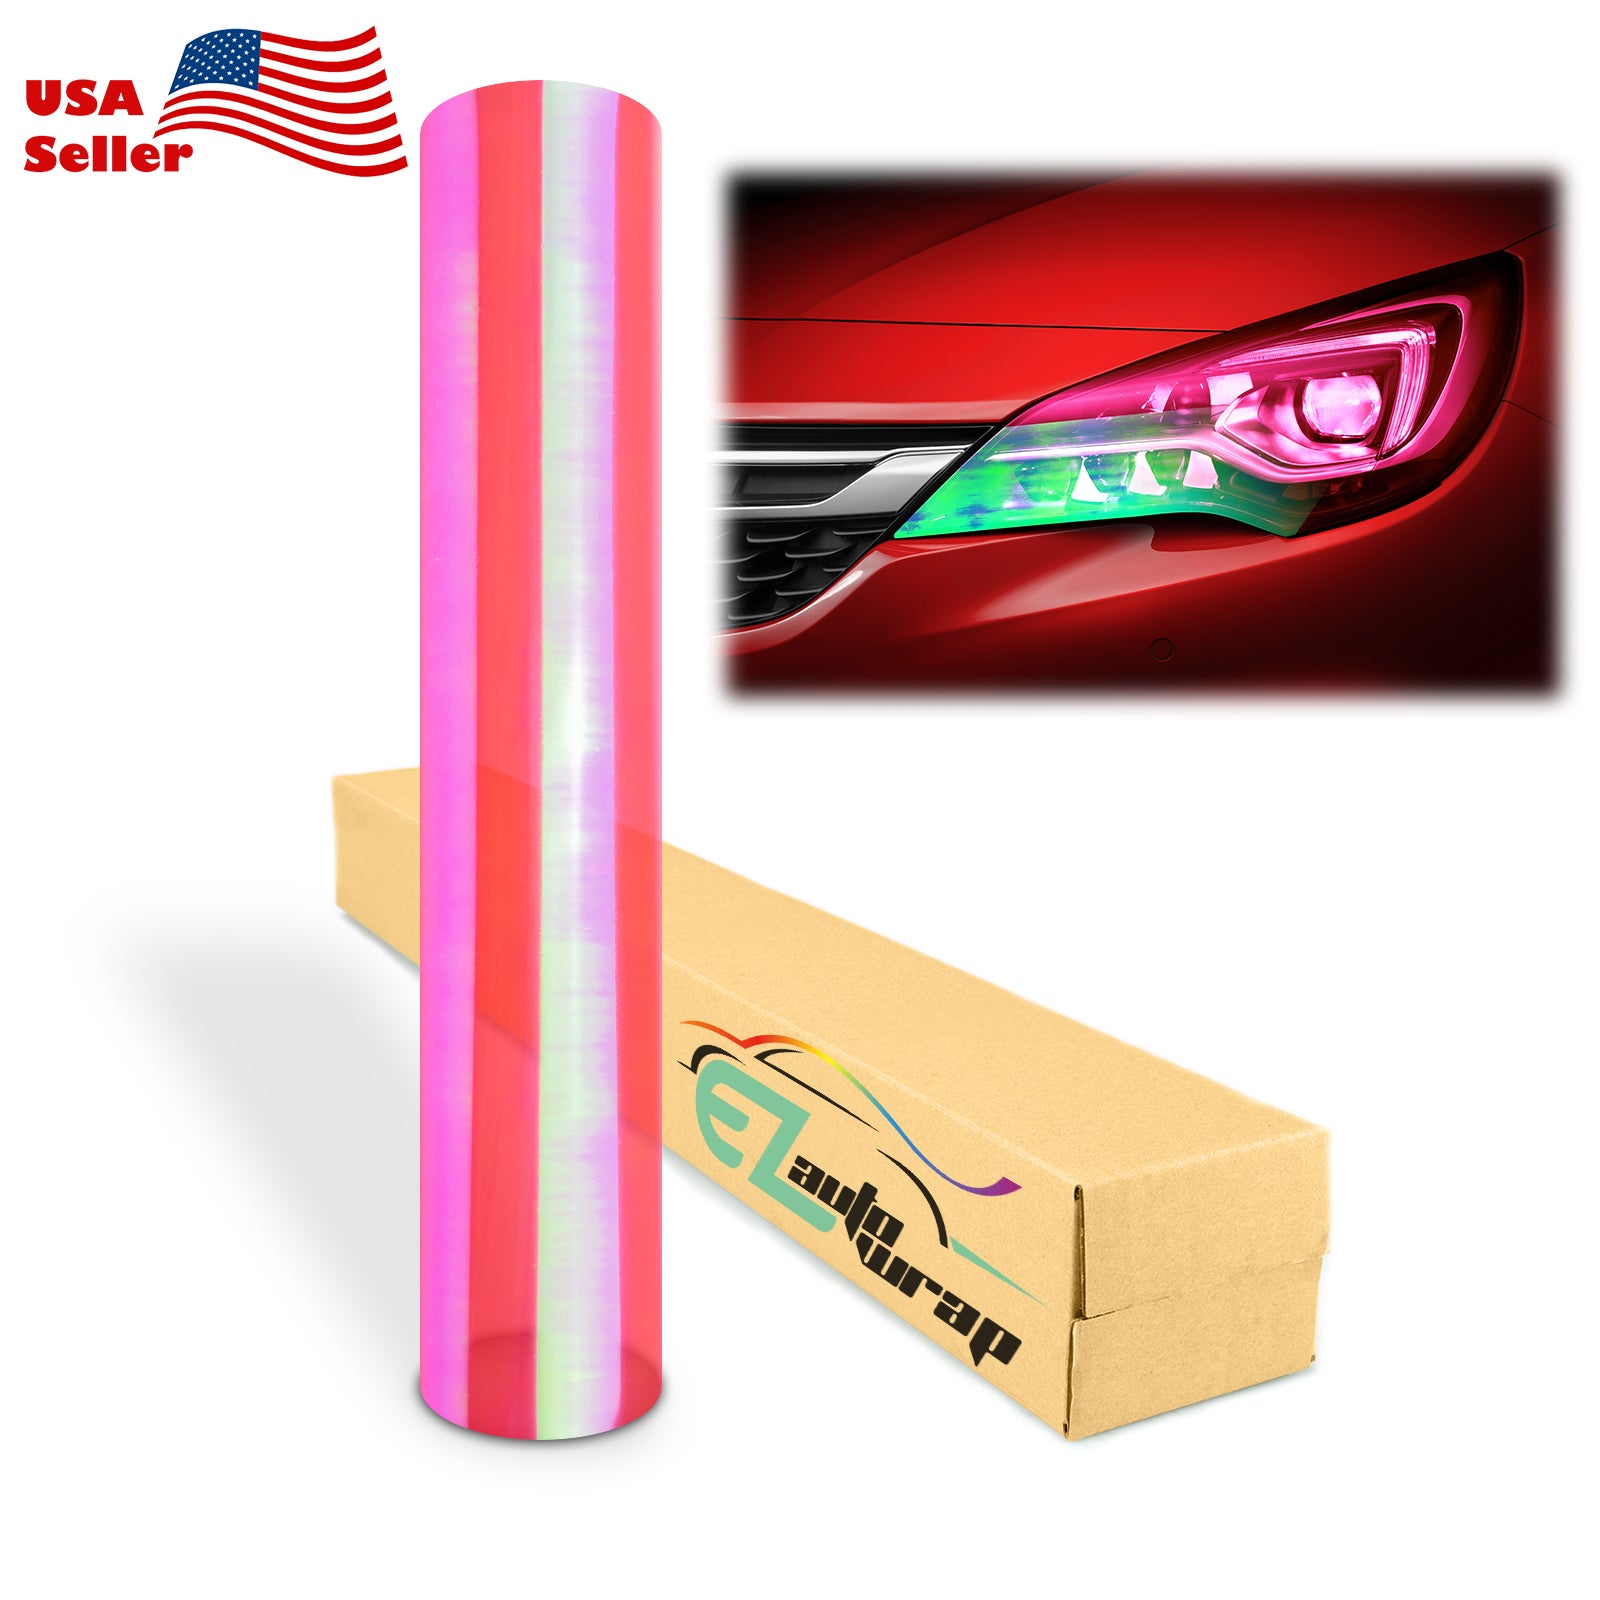 Extra Wide Chameleon Neo Pearl Pink Taillight Headlight Tint Film